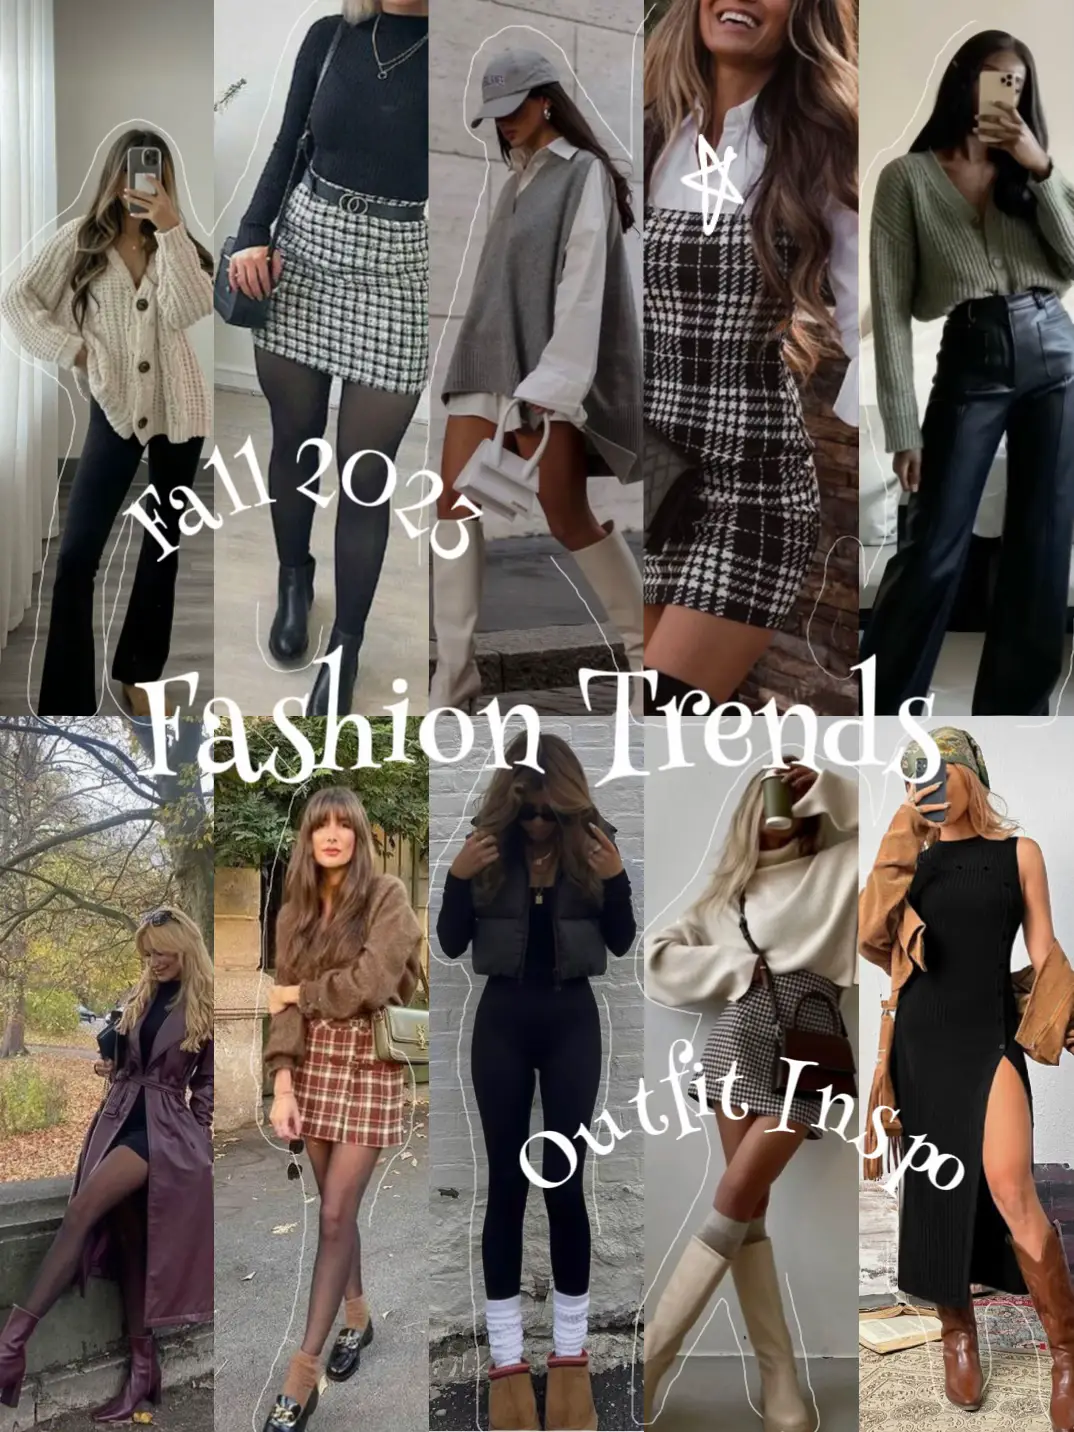 The TOP 10 Fall Fashion Trends 2020 that you need to try - Gabrielle Arruda